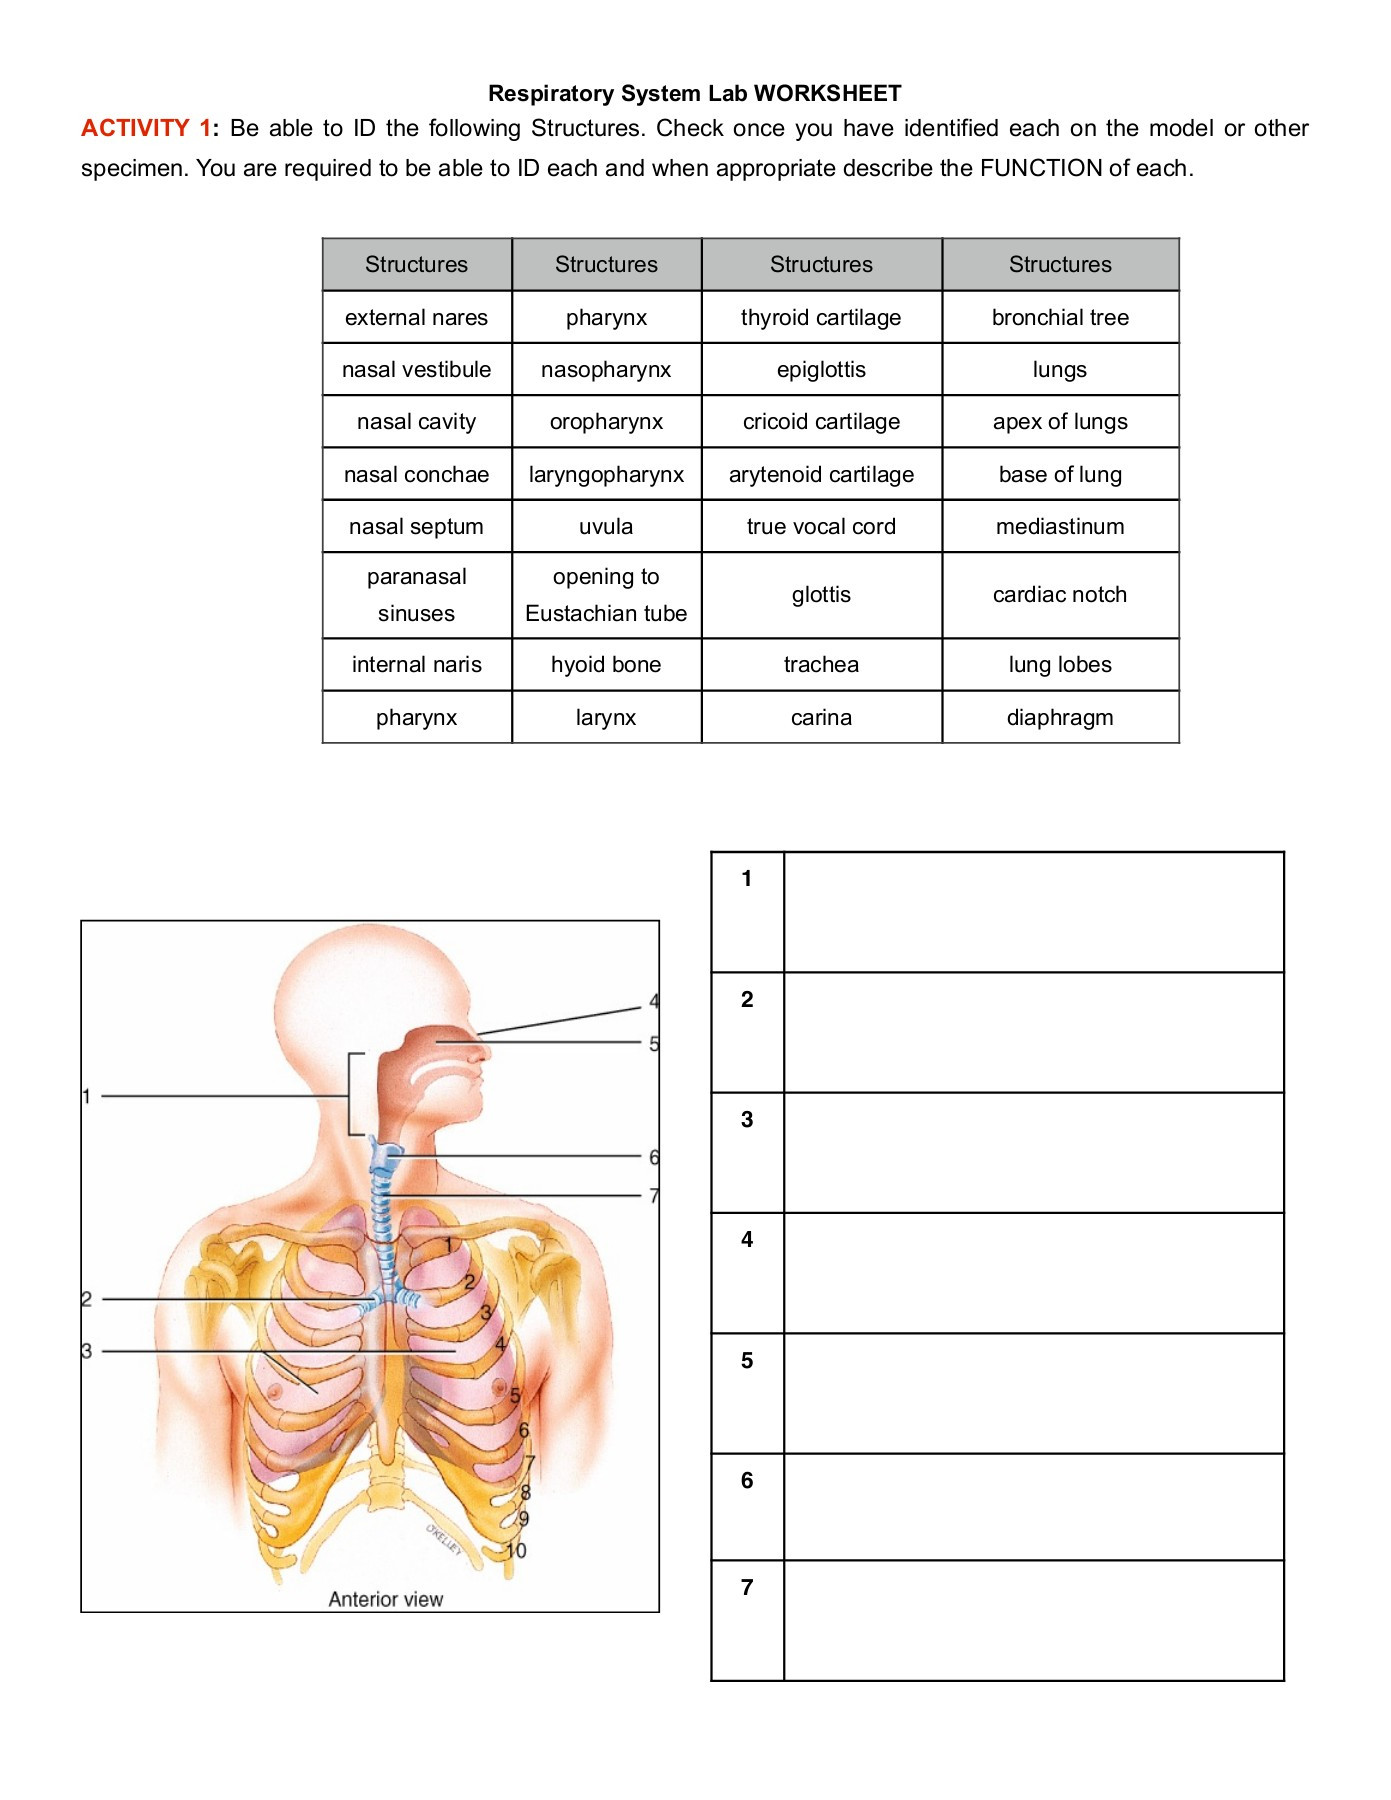 Respiratory System Worksheet Pdf Respiratory System Lab Worksheet Activity 1 Pages 1 10